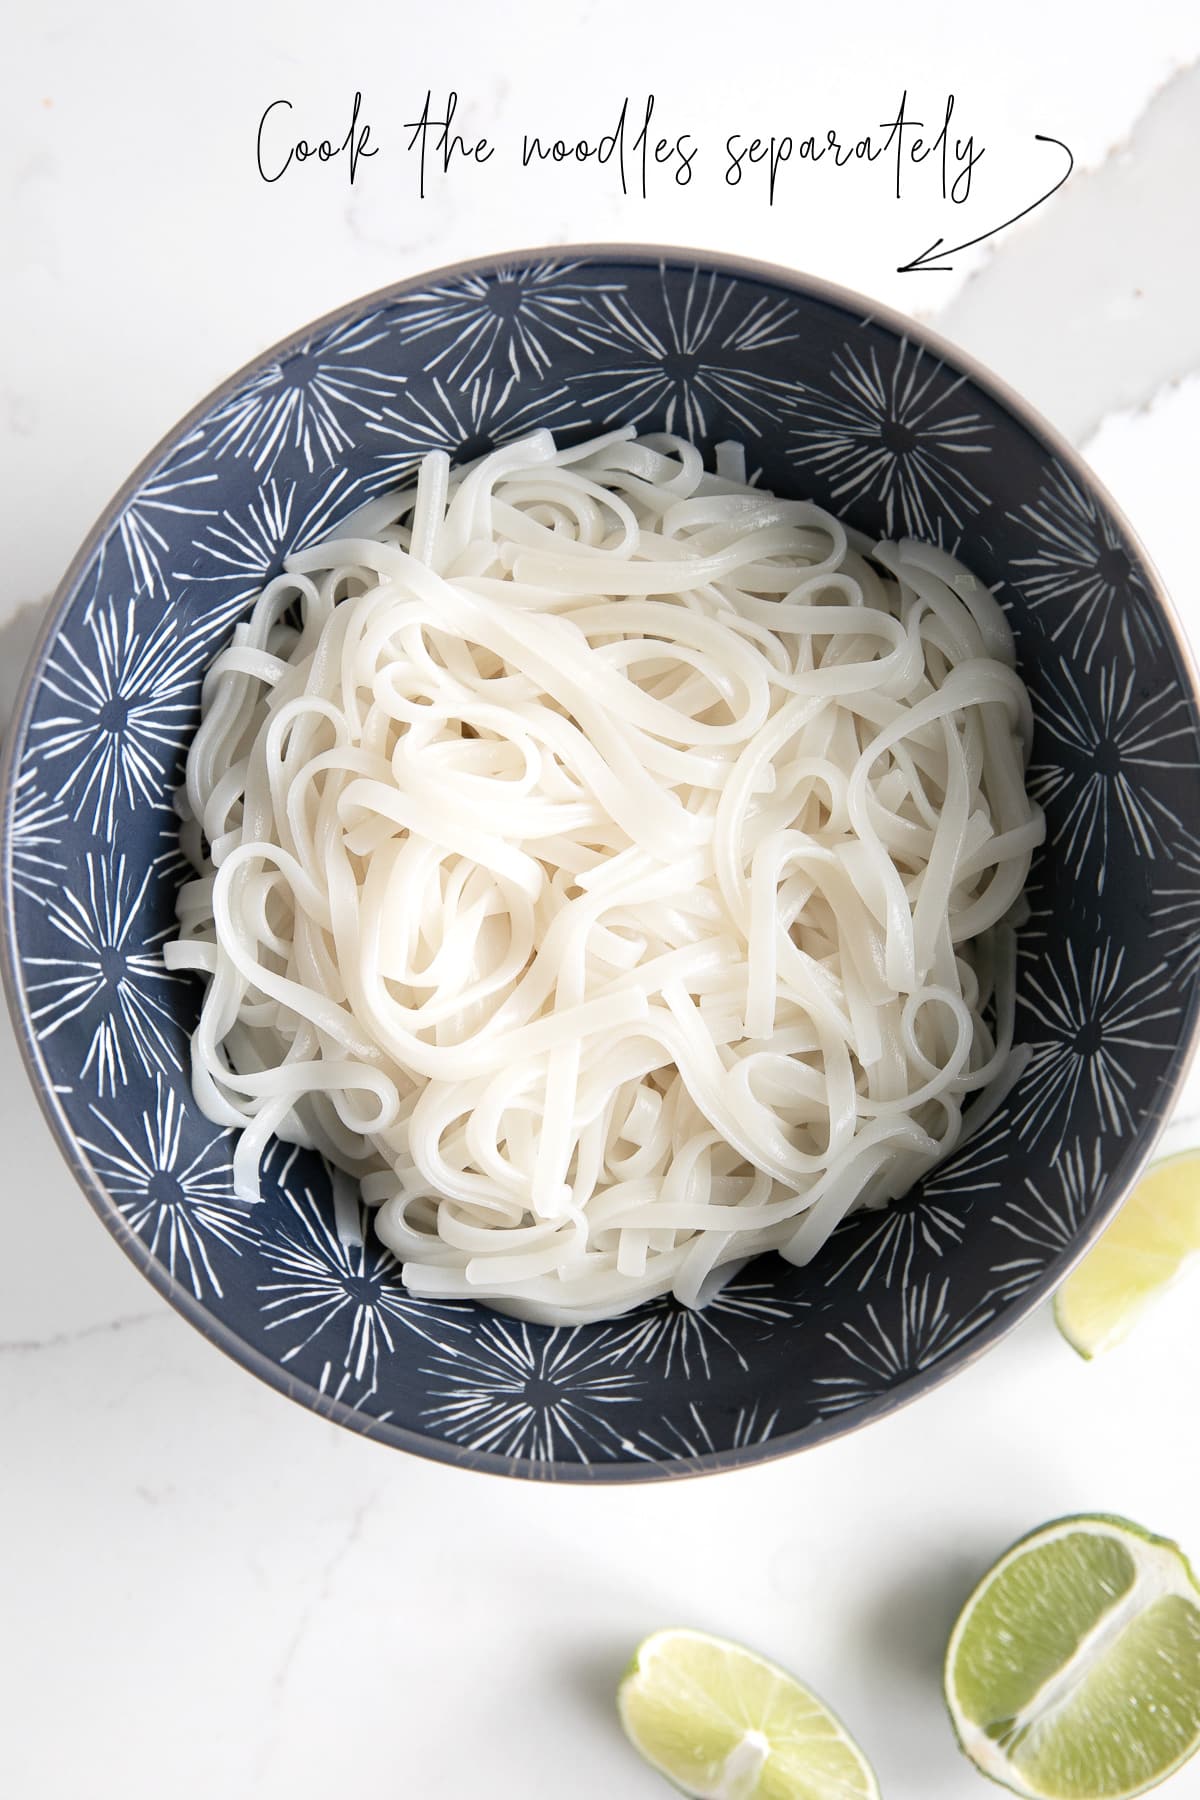 A blue bowl full of cooked rice noodles, with text overlay stating, "cook the noodles separately" with an arrow pointing to noodles.